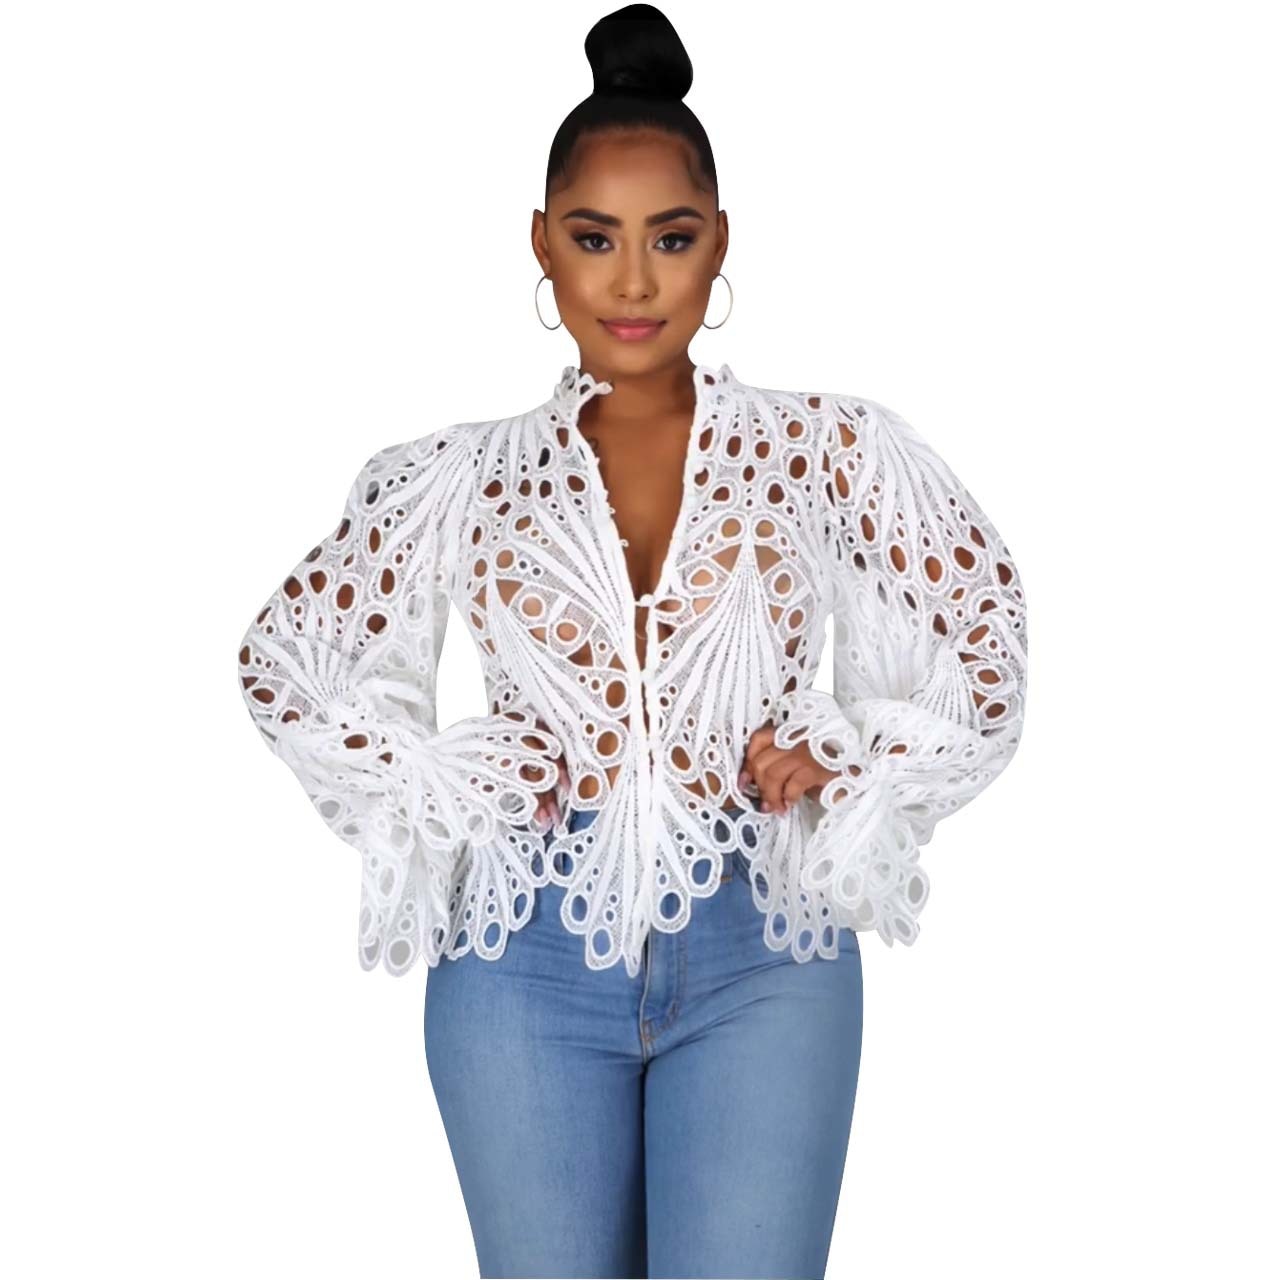 Elegant Short Sleeve Hollow Out Lace Sheer See Through Blouse